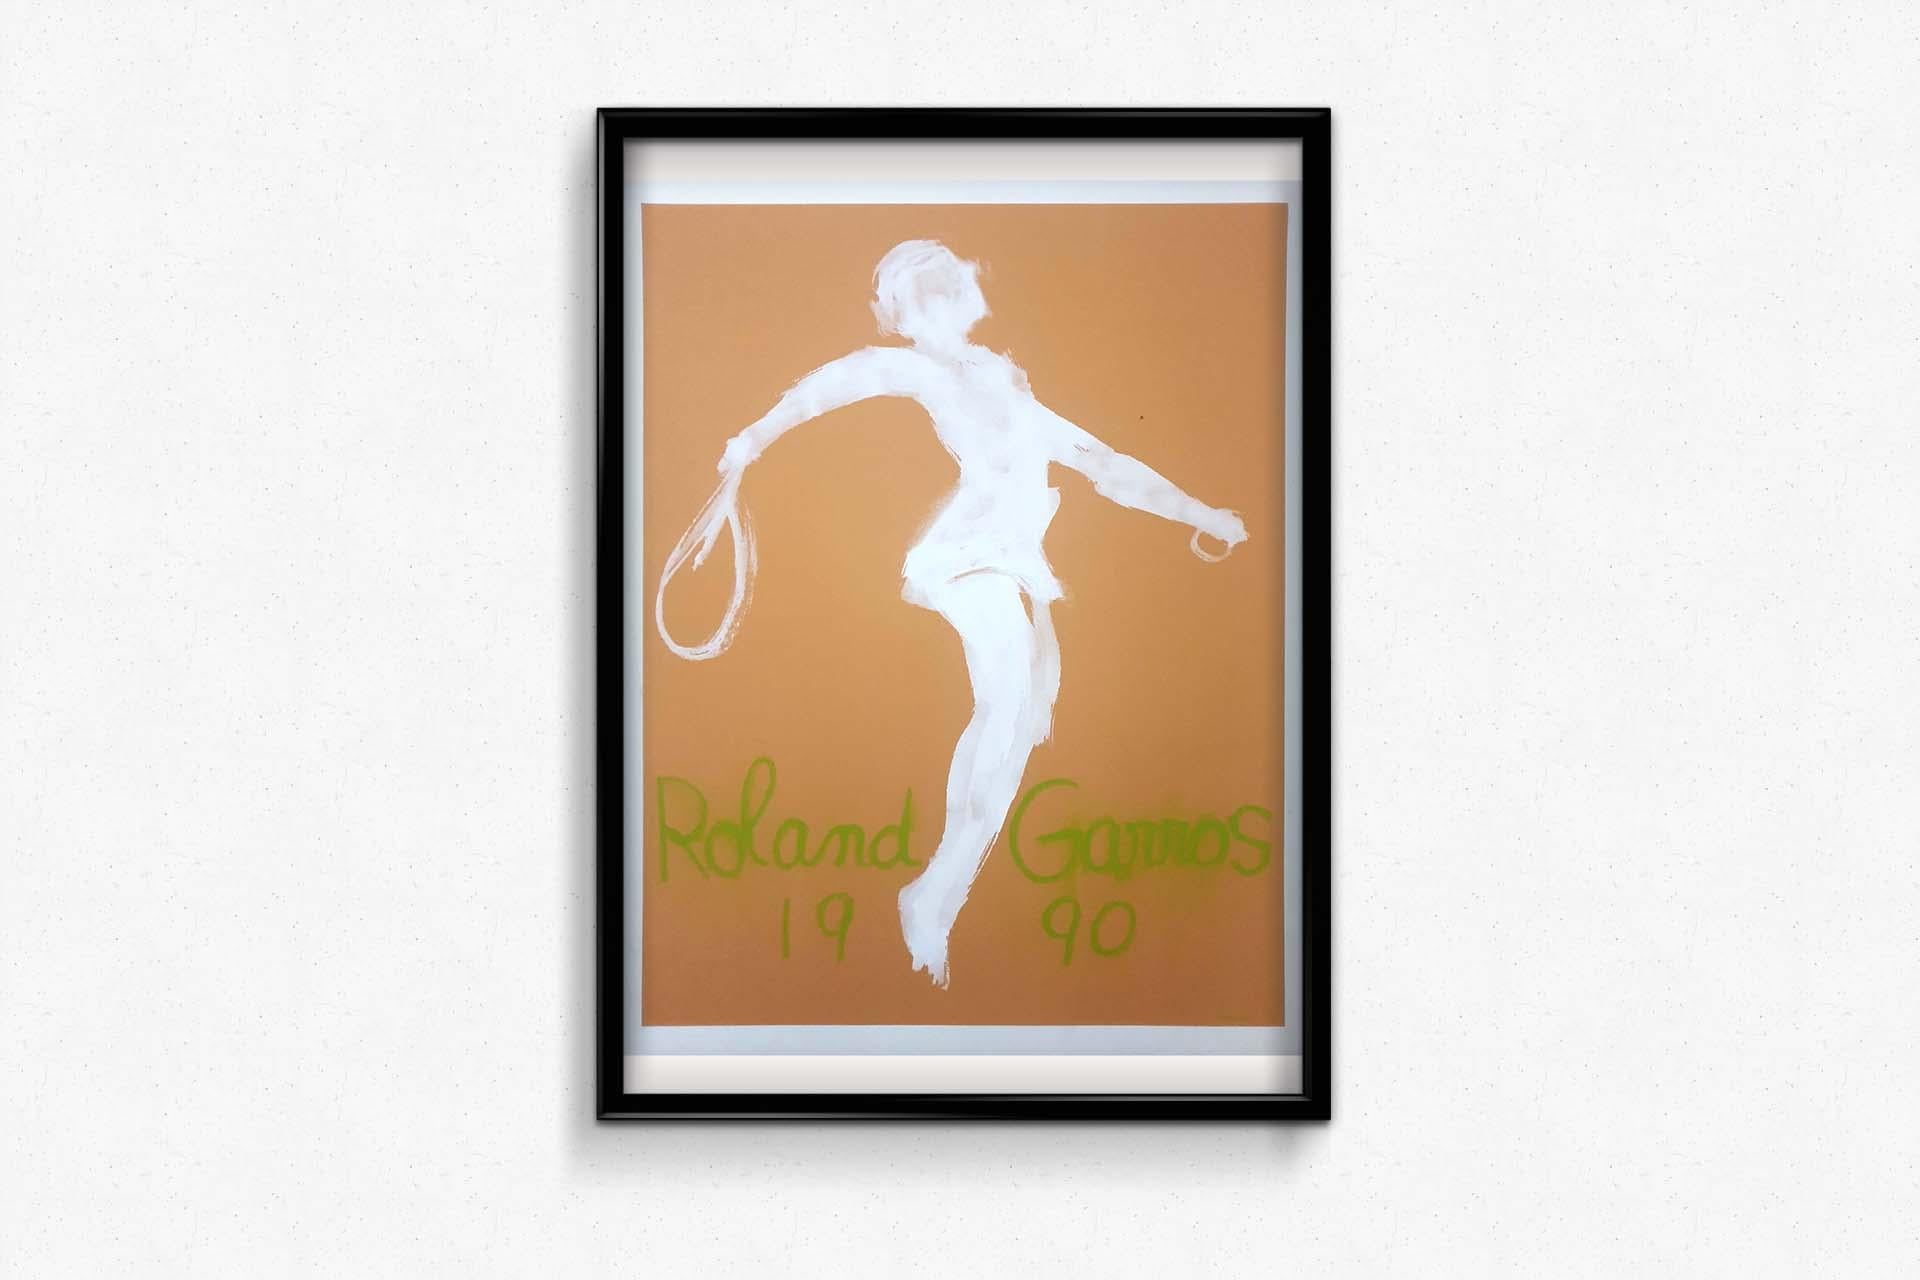 Very beautiful poster to promote the 1990 French Tennis Open (Roland Garros Tournament) now called Roland Garros, which is one of the four Grand Slam tournaments. Since 1980, the F.F.T (French Tennis Federation), in partnership with the Lelong